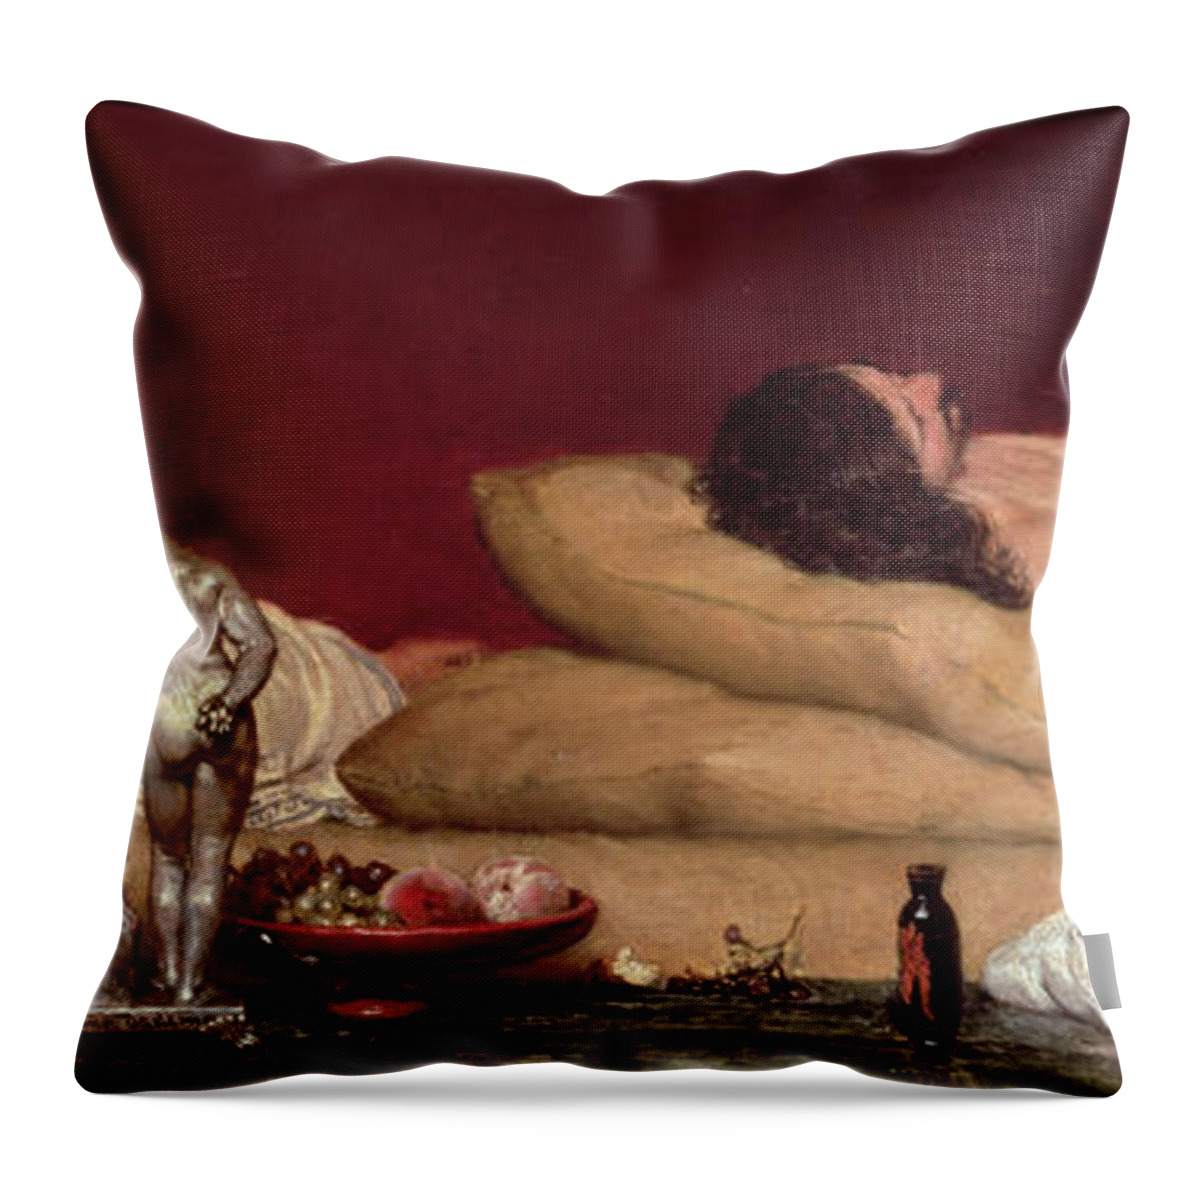 The Throw Pillow featuring the painting The Siesta by Lawrence Alma-Tadema